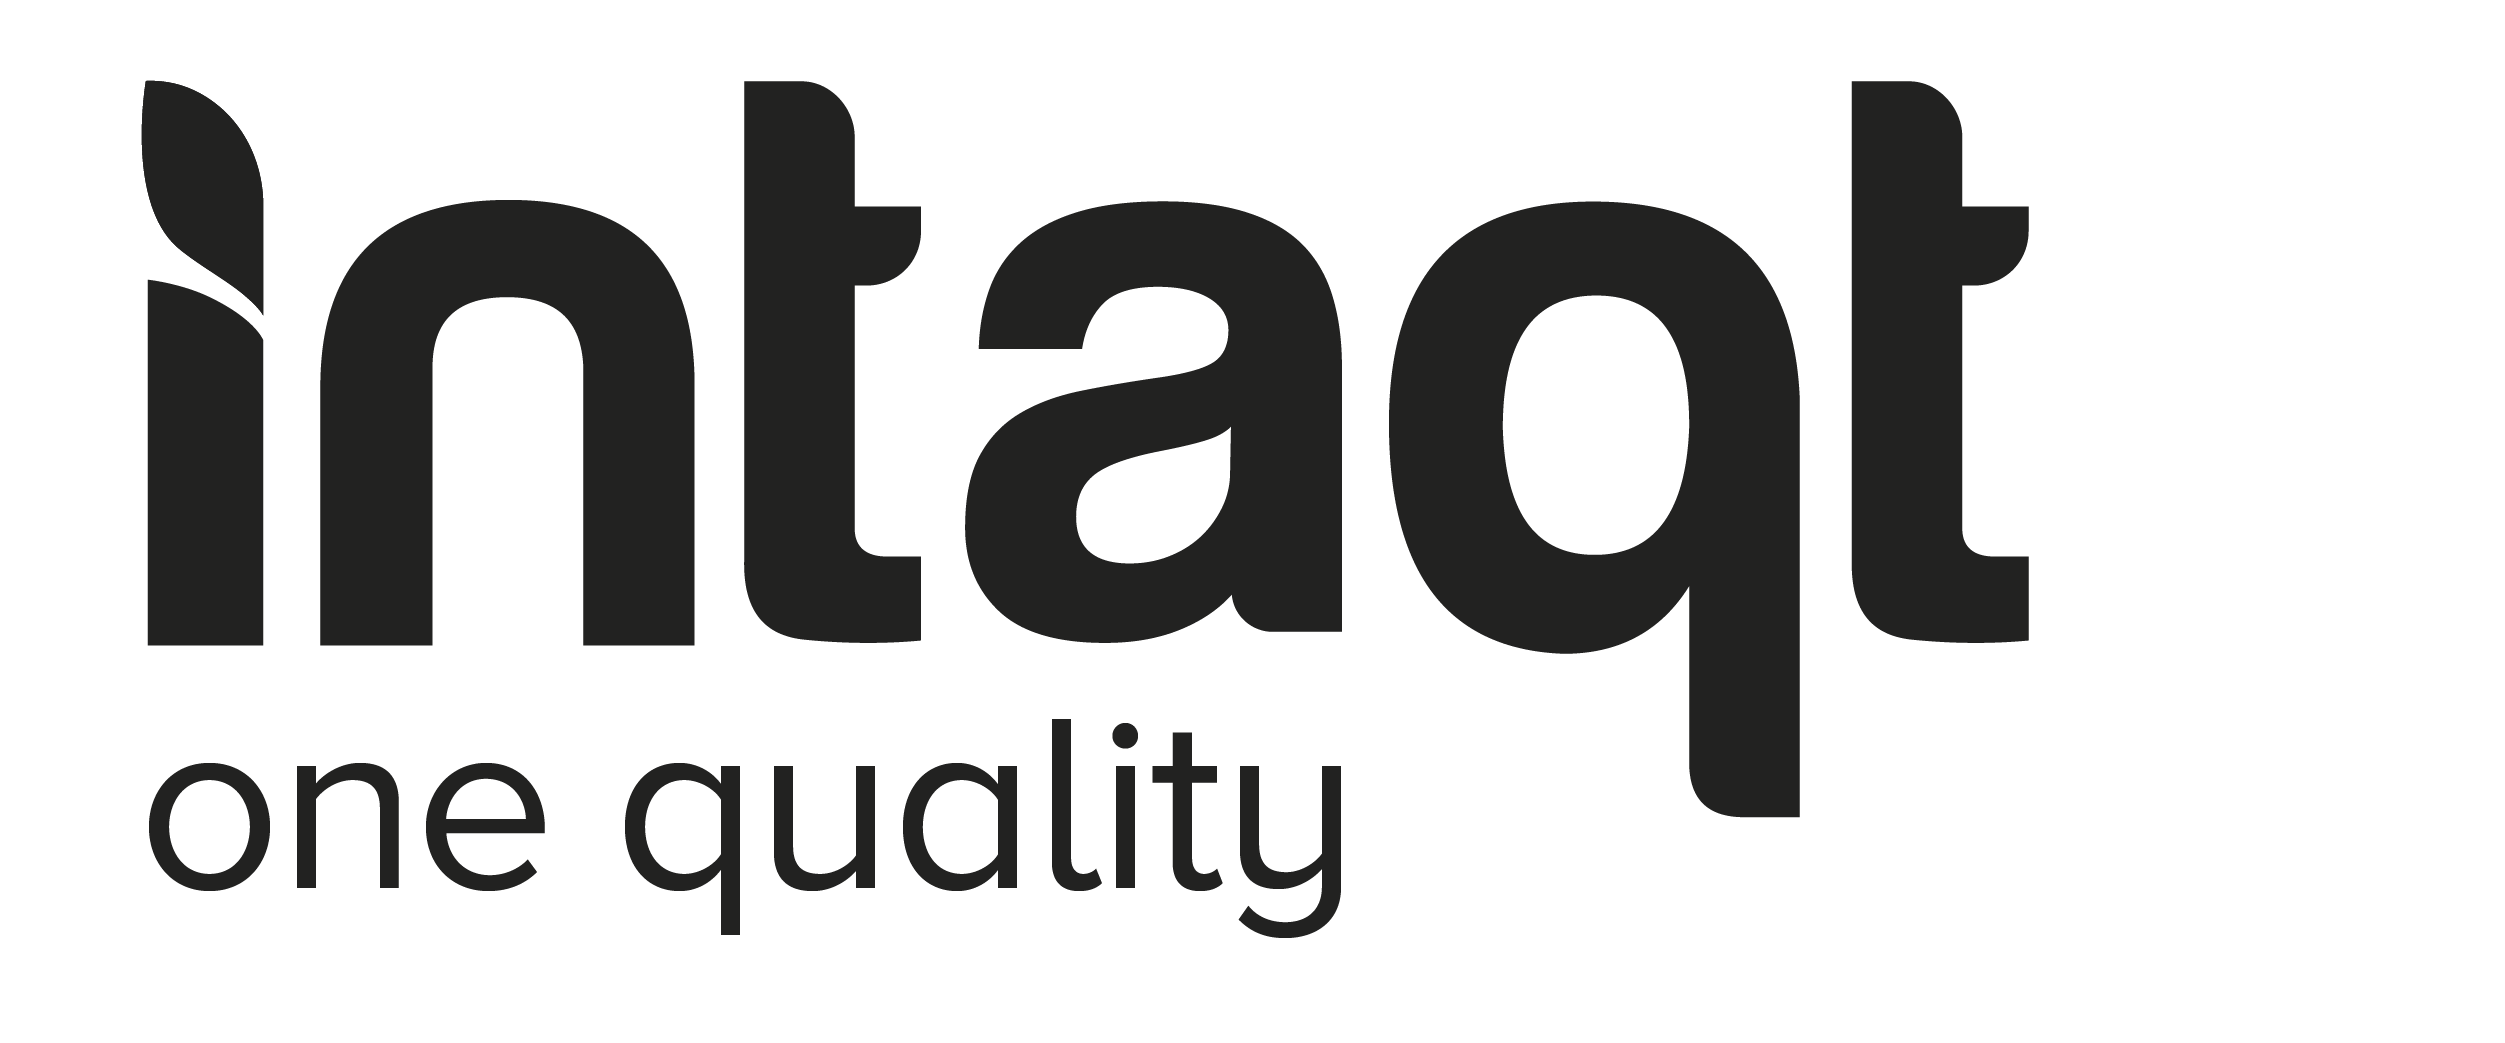 INTAQT – H2020 Welcome to the H2020 INTAQT project! With the goal of linking sustainability and husbandry systems, INTAQT intends to reach the One Quality of animal products.